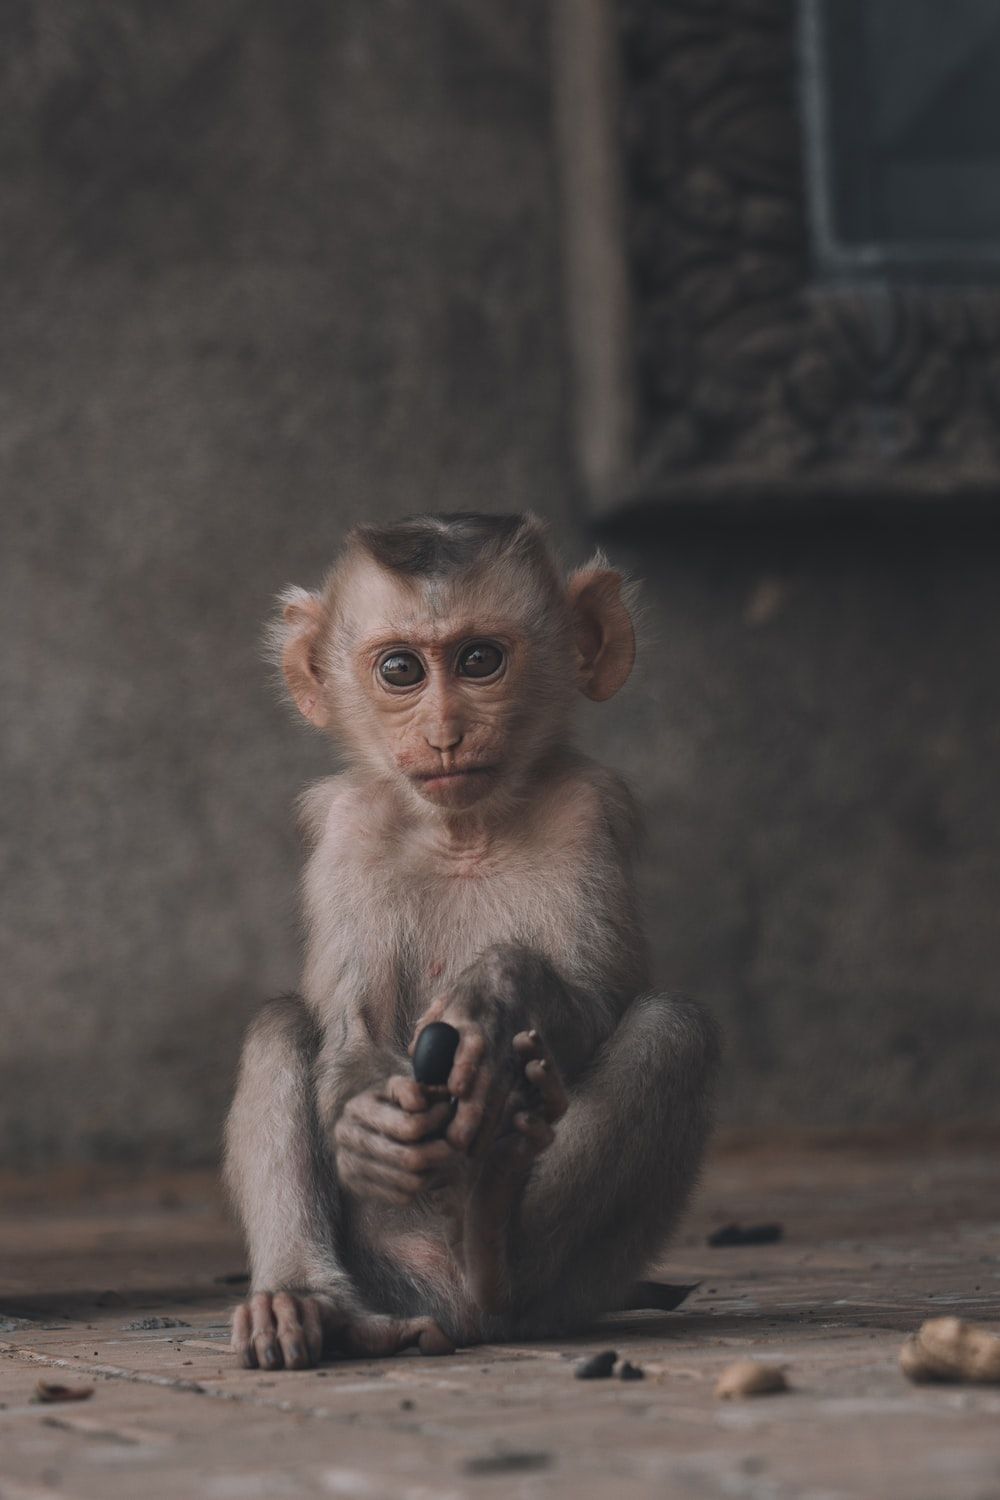 Monkey Picture [HD]. Download Free Image